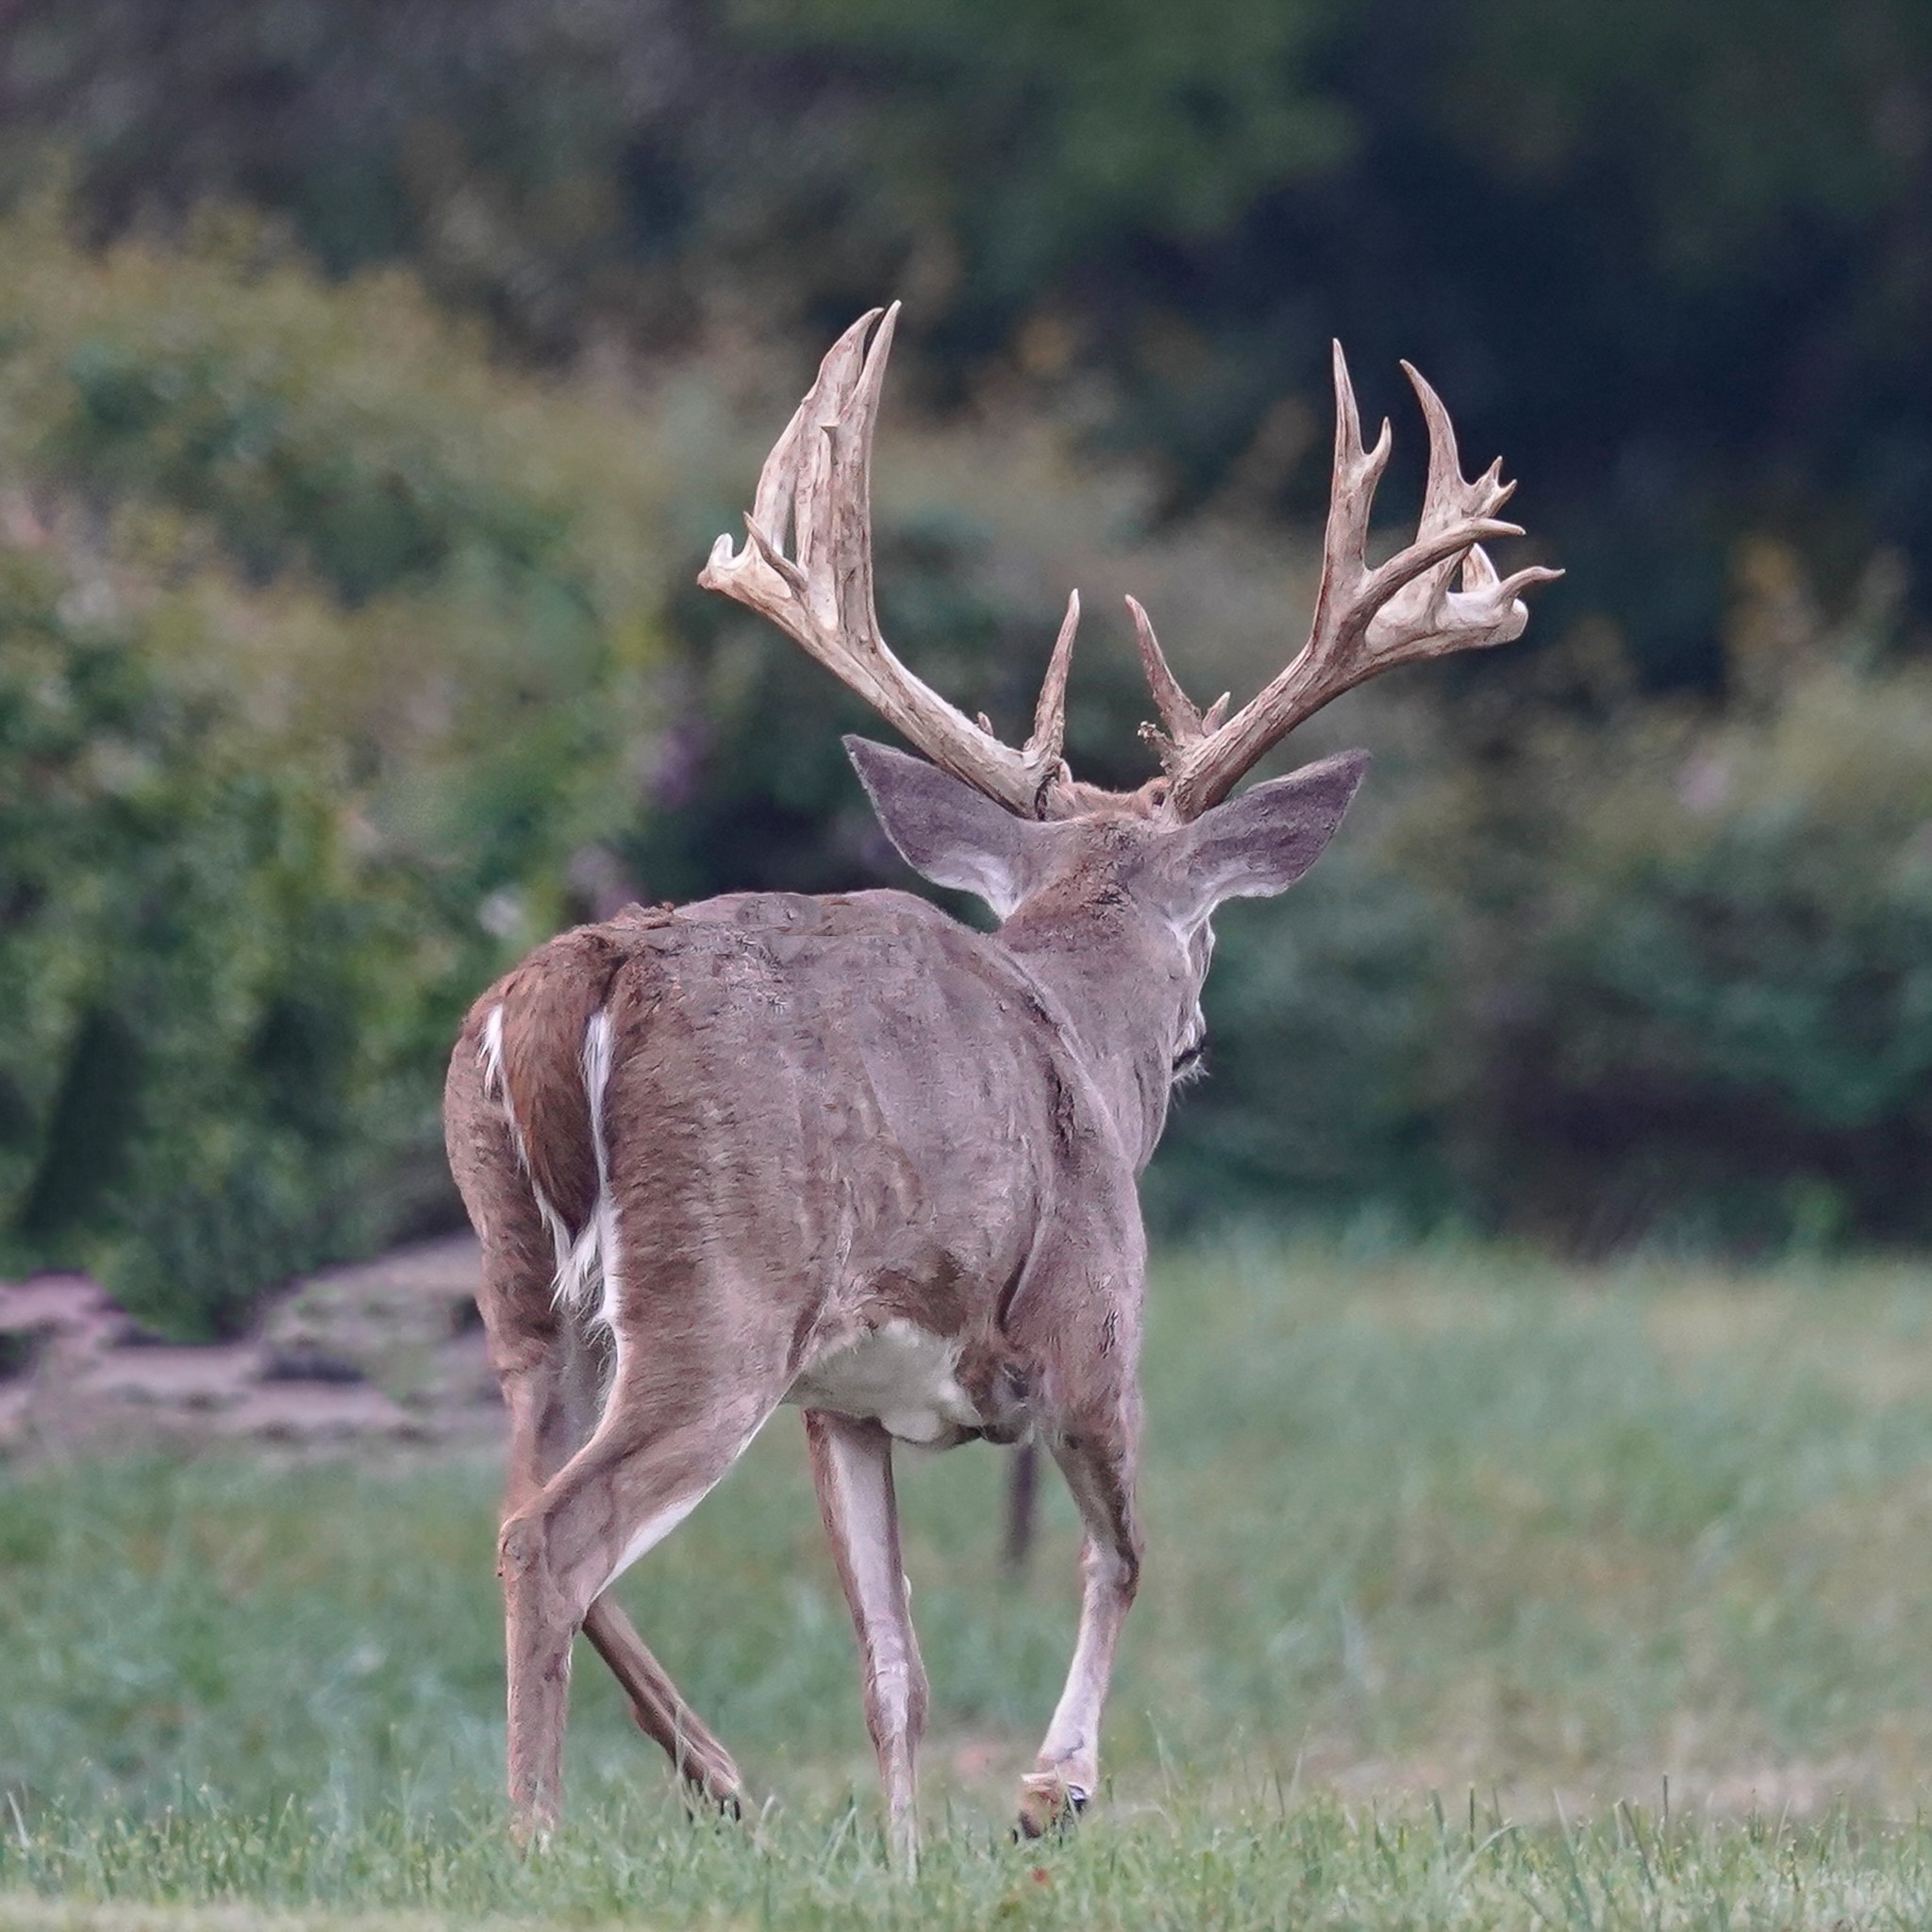 Big typical buck walking away from the camera in a grassy field.